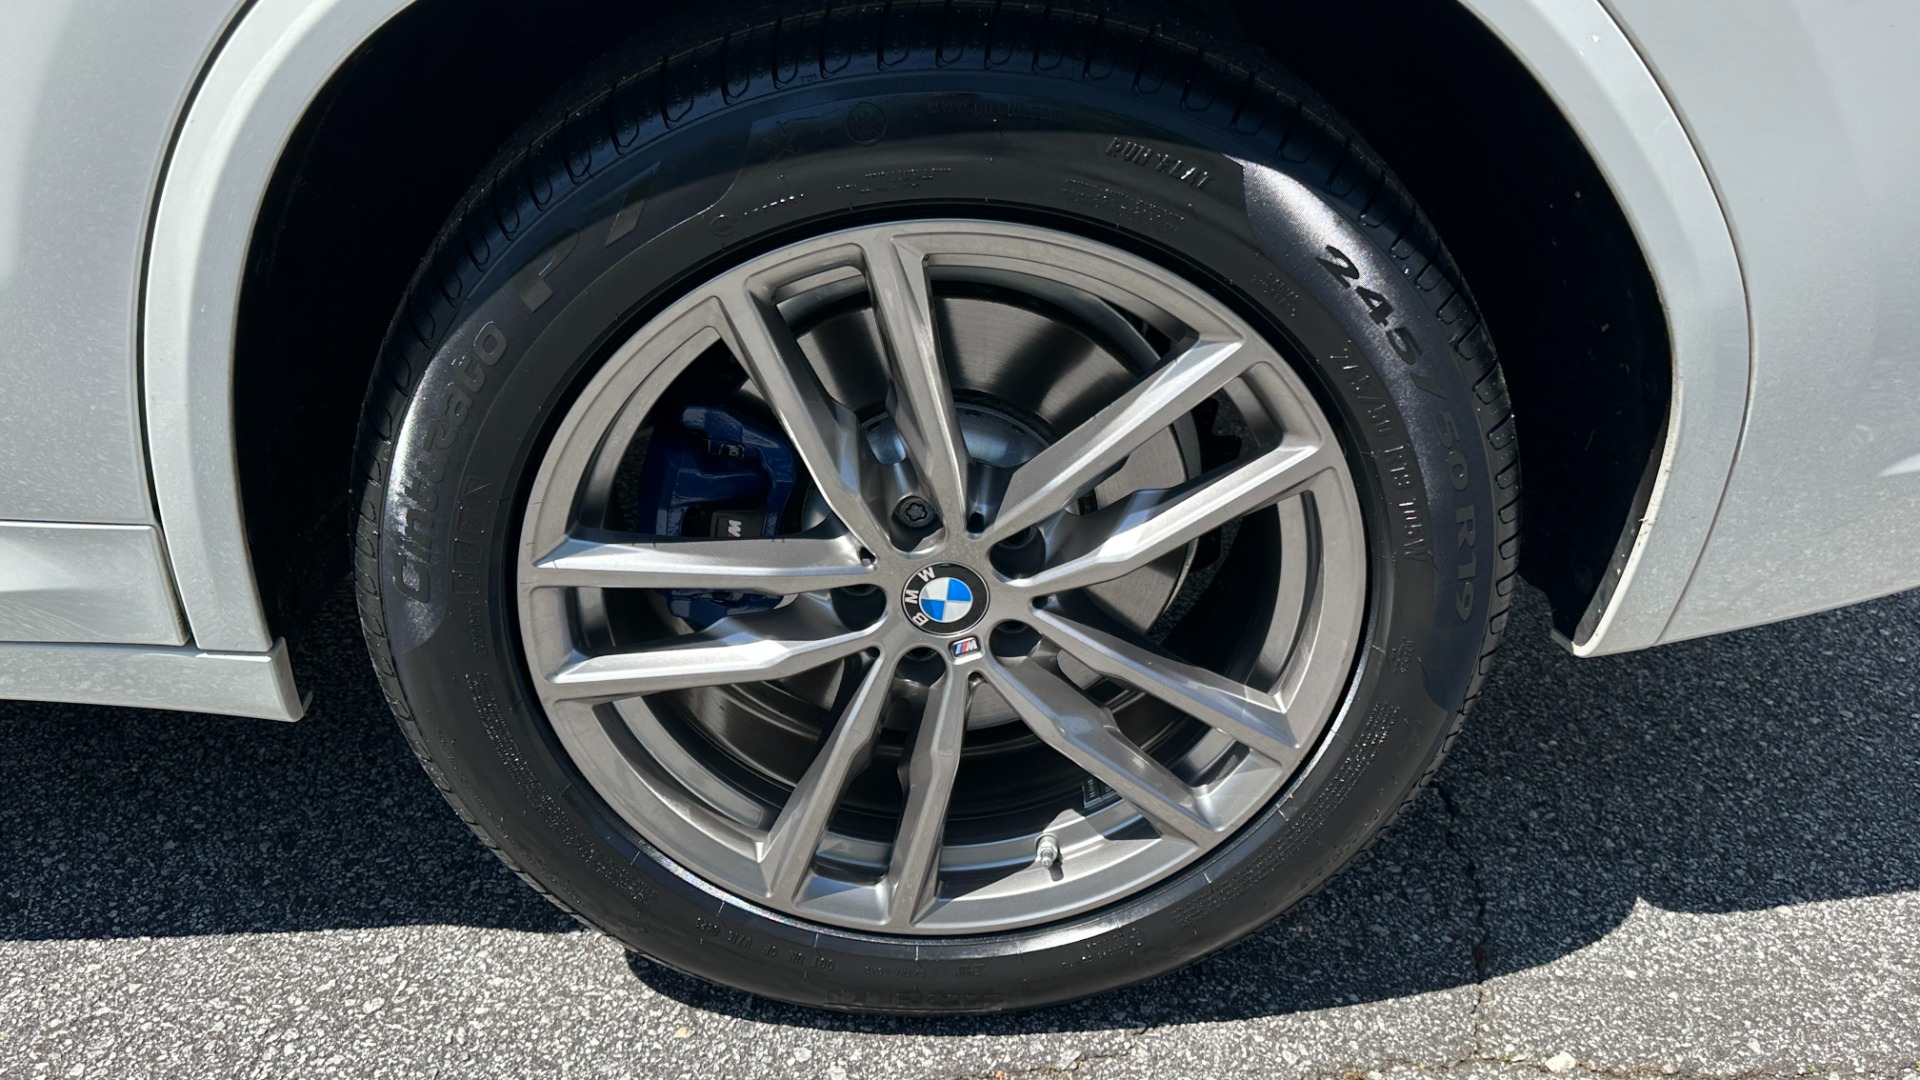 Used 2021 BMW X3 M40i / TRAILER HITCH / REAR VIEW CAMERA / STORAGE PKG / GALVANIC CONTROLS for sale $50,495 at Formula Imports in Charlotte NC 28227 49